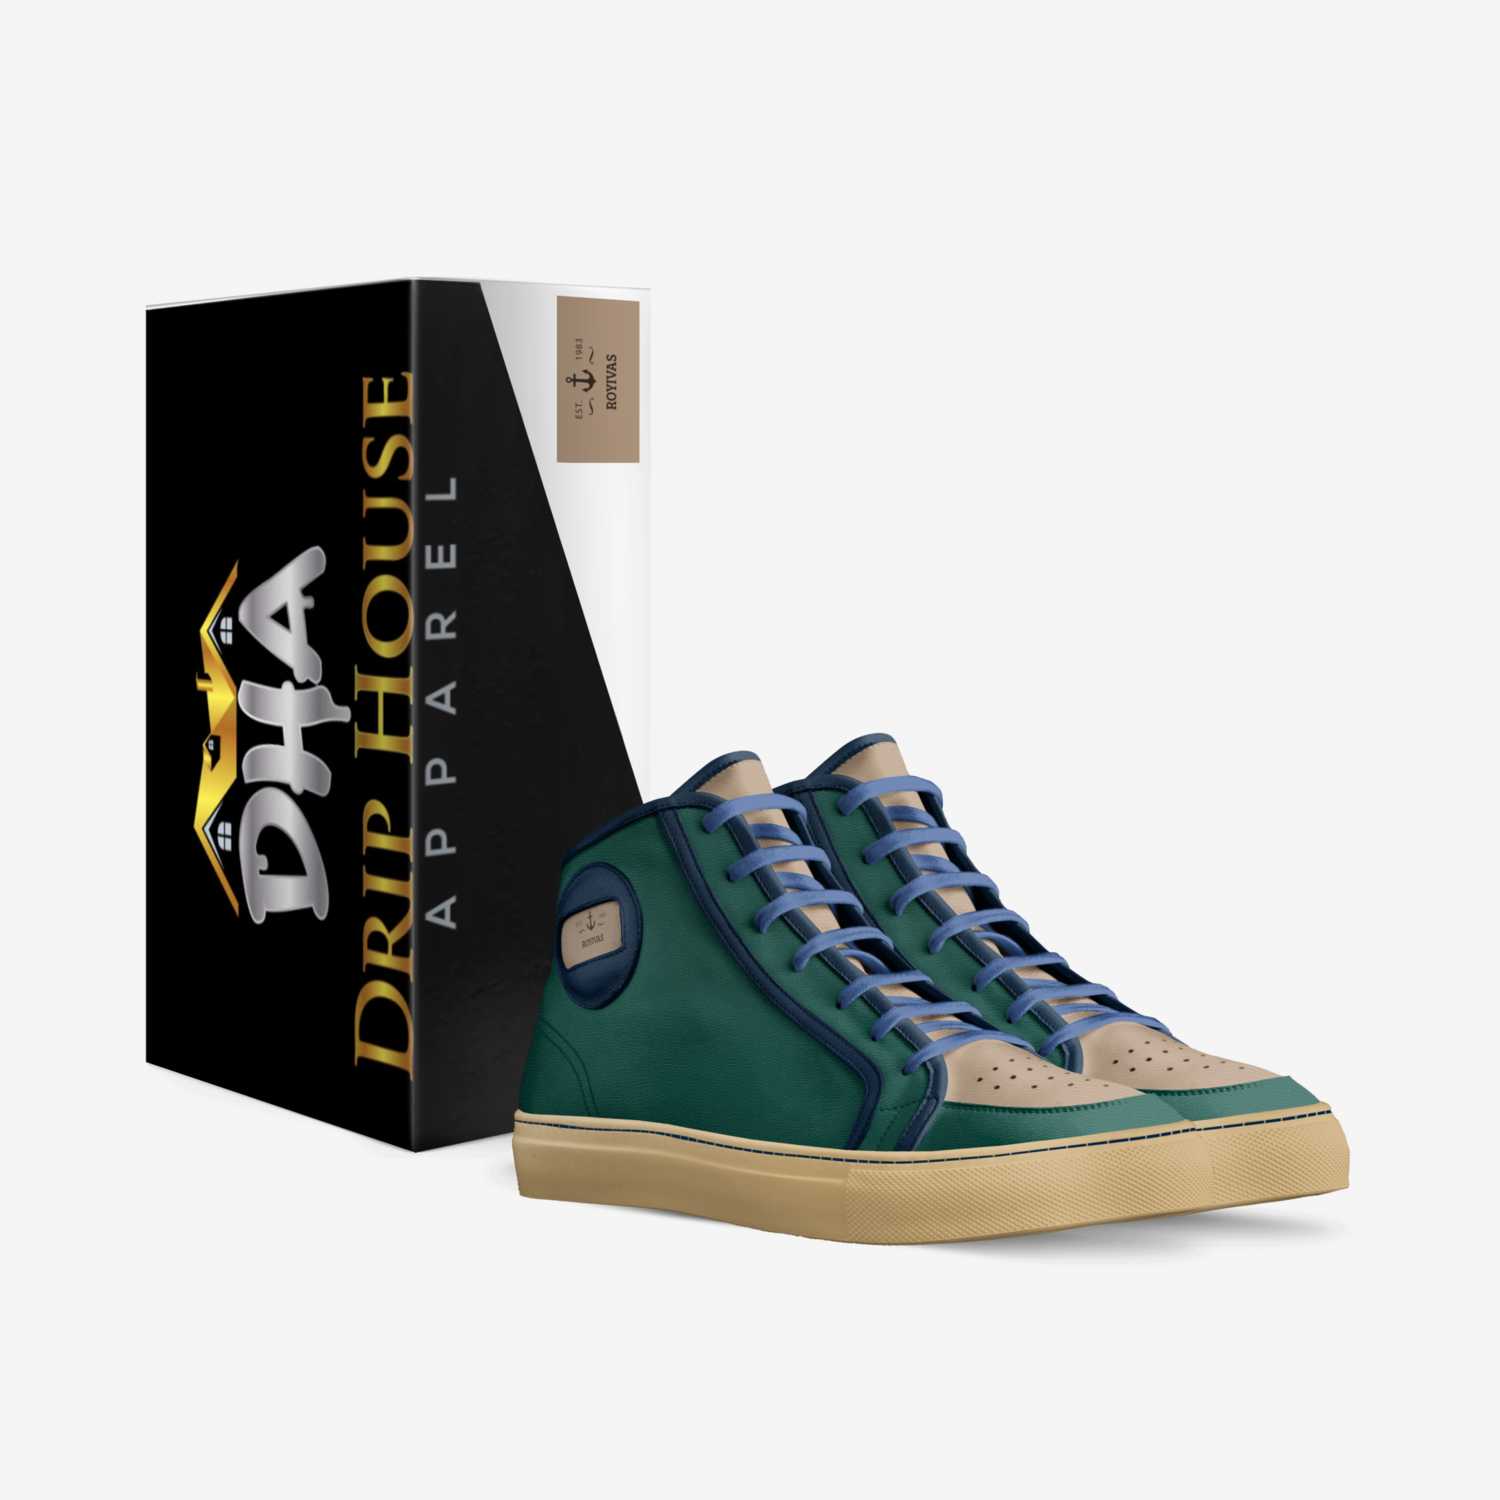 Royivas custom made in Italy shoes by King K-ro | Box view